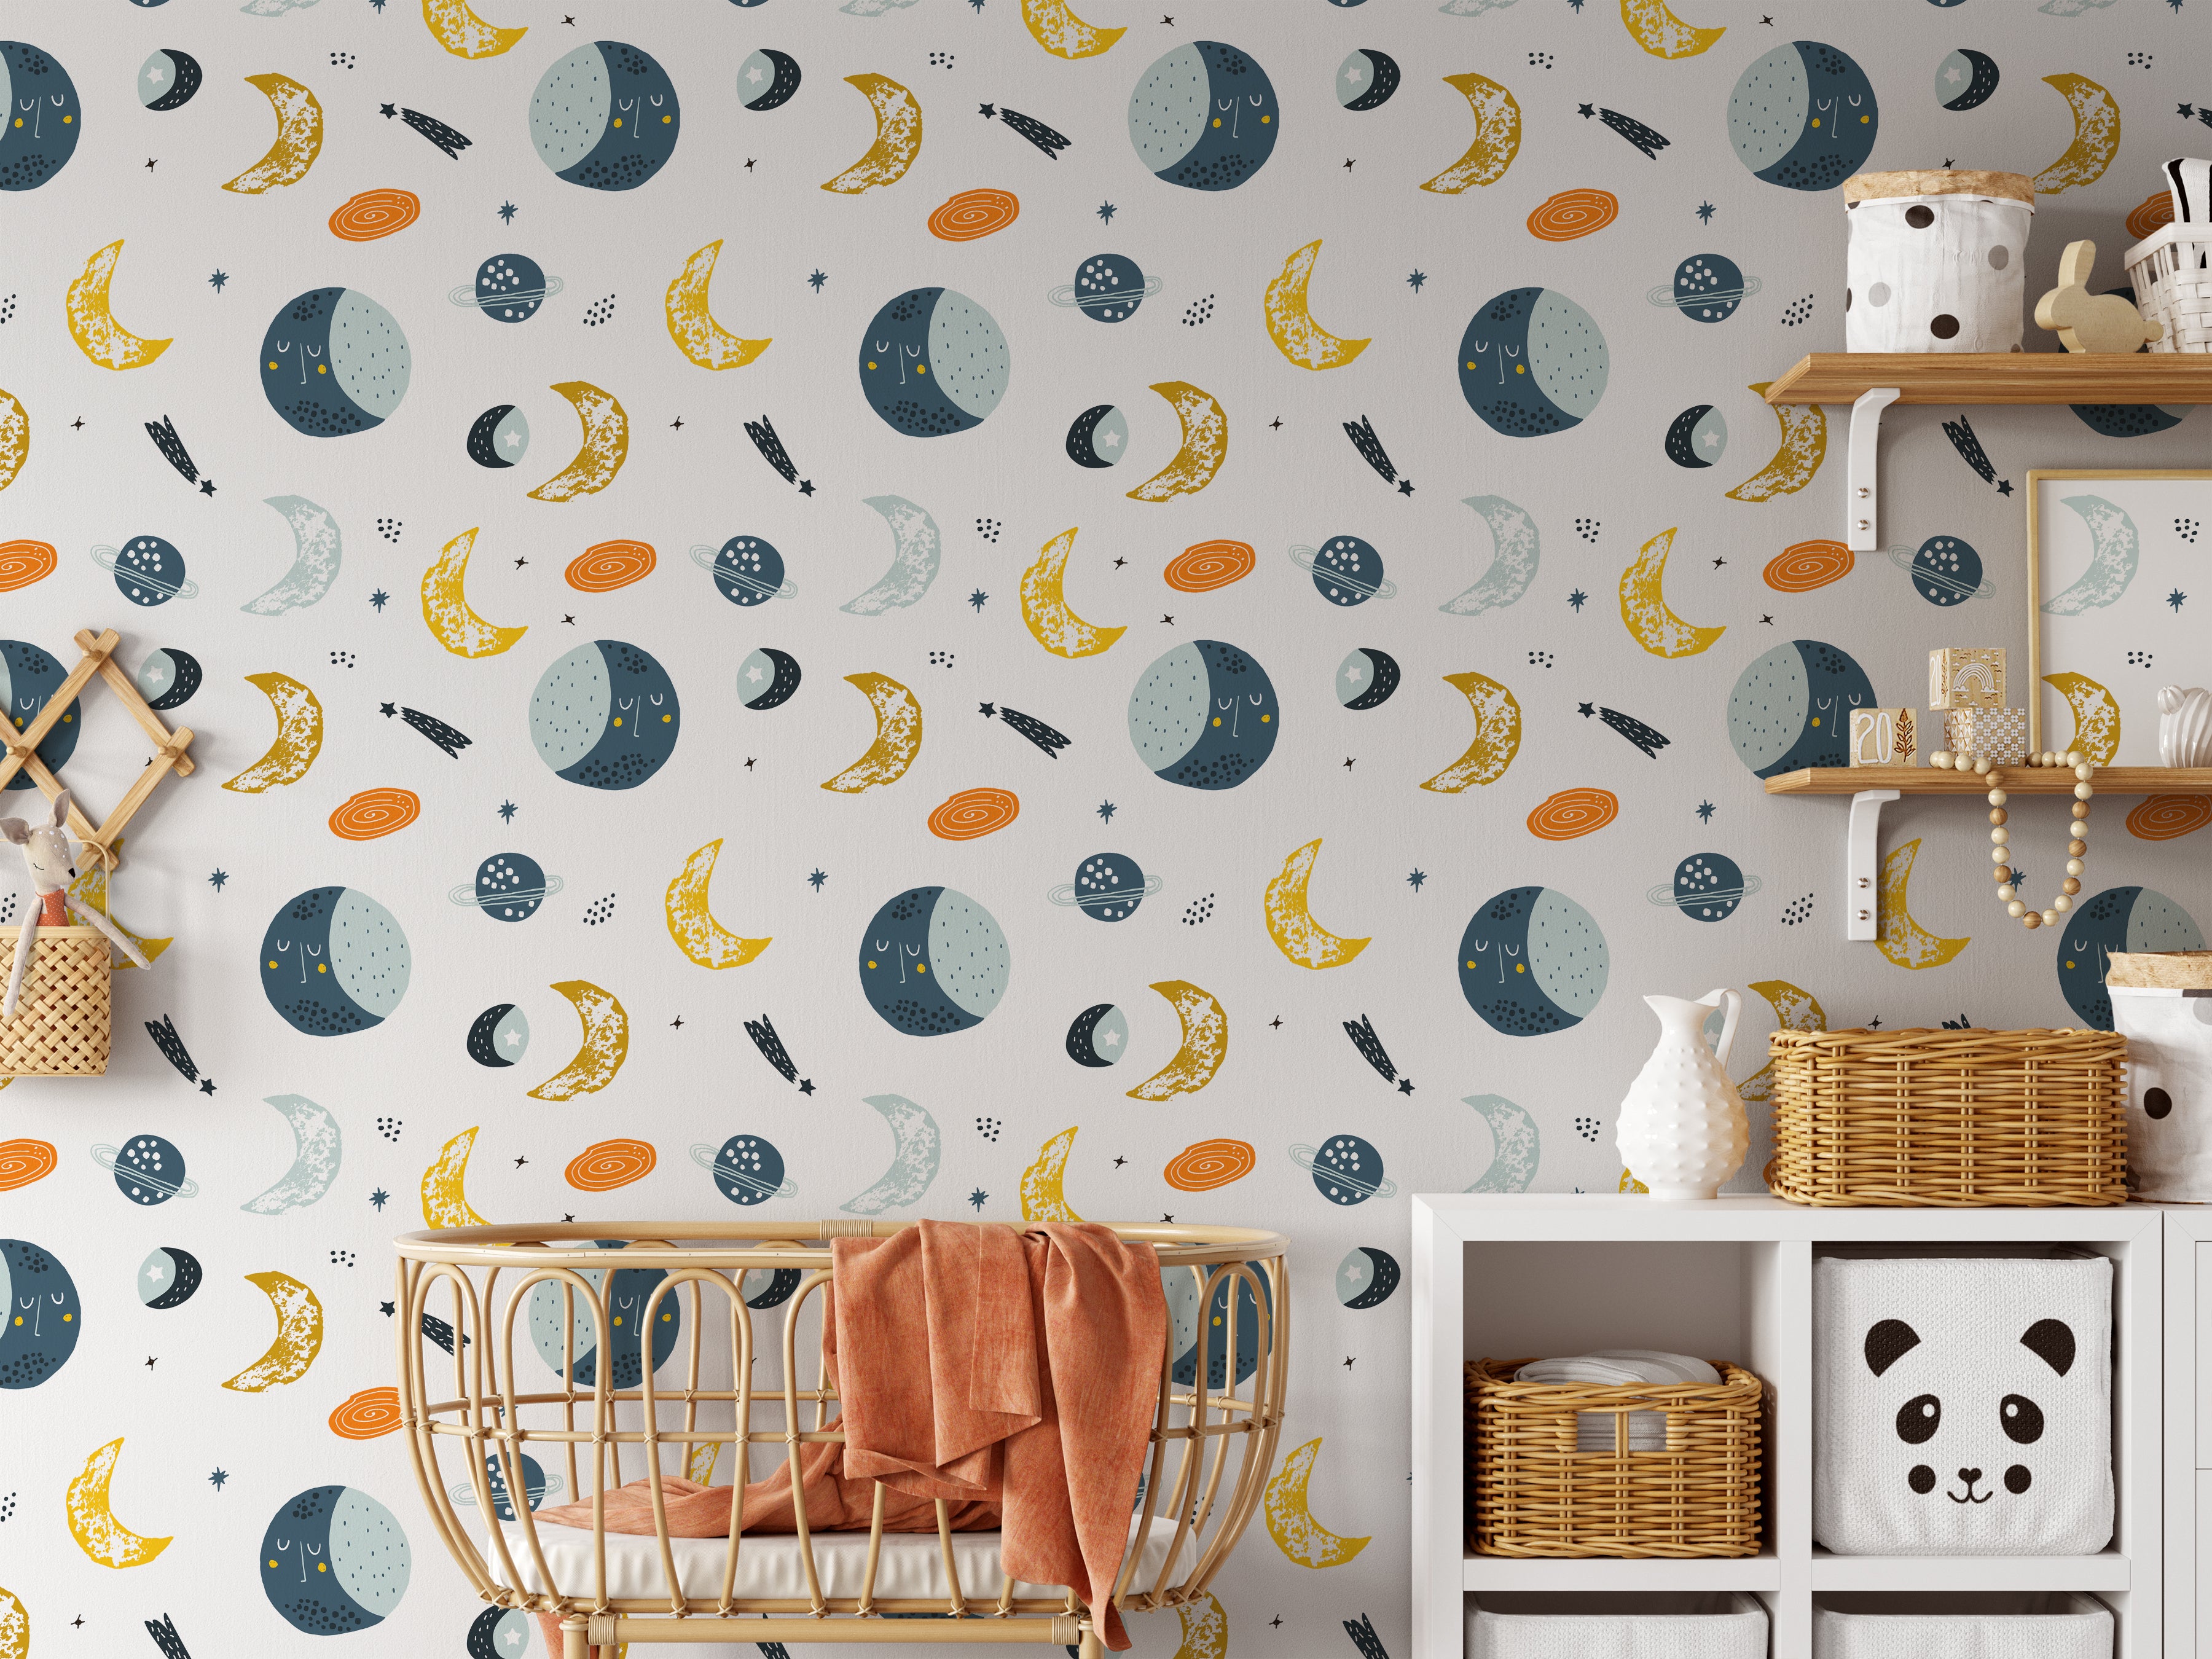 A cozy nursery featuring a wall adorned with a celestial-themed wallpaper. The wallpaper includes playful illustrations of moons, stars, planets, and comets, creating a dreamy and serene atmosphere. The room is furnished with a wicker crib, shelves, and storage baskets.